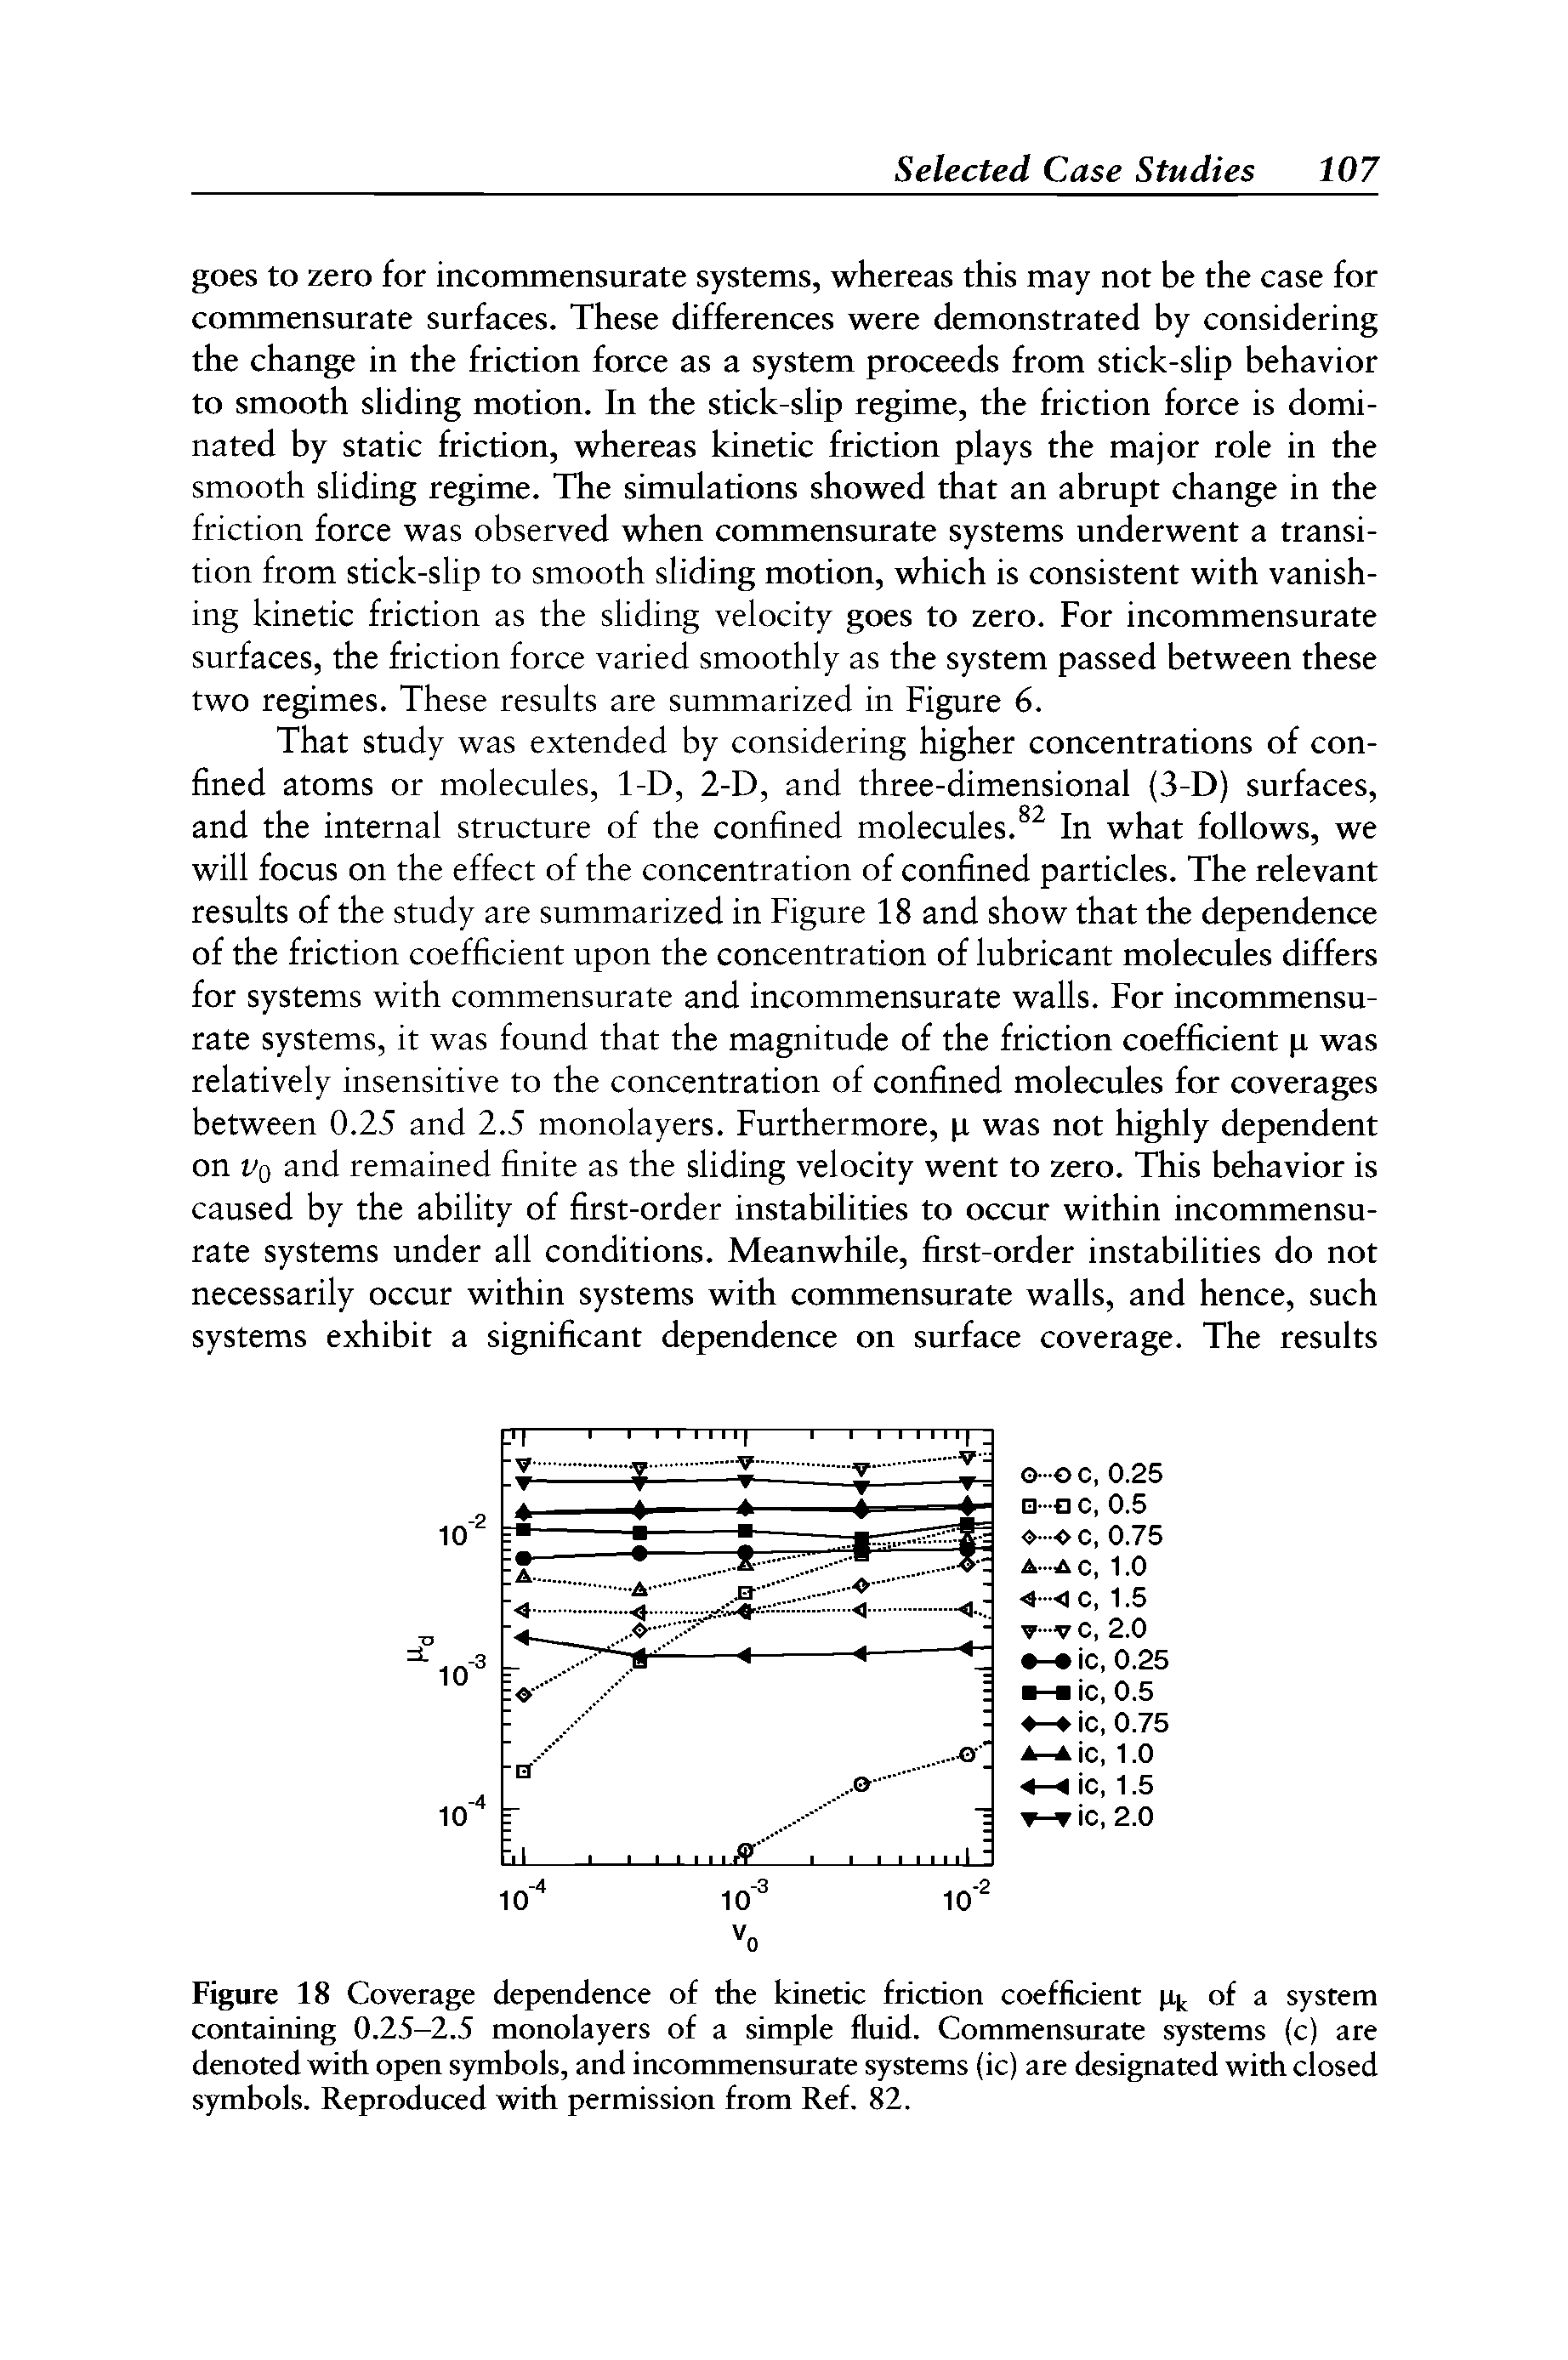 Figure 18 Coverage dependence of the kinetic friction coefficient pk of a system containing 0.25-2.5 monolayers of a simple fluid. Commensurate systems (c) are denoted with open symbols, and incommensurate systems (ic) are designated with closed symbols. Reproduced with permission from Ref. 82.